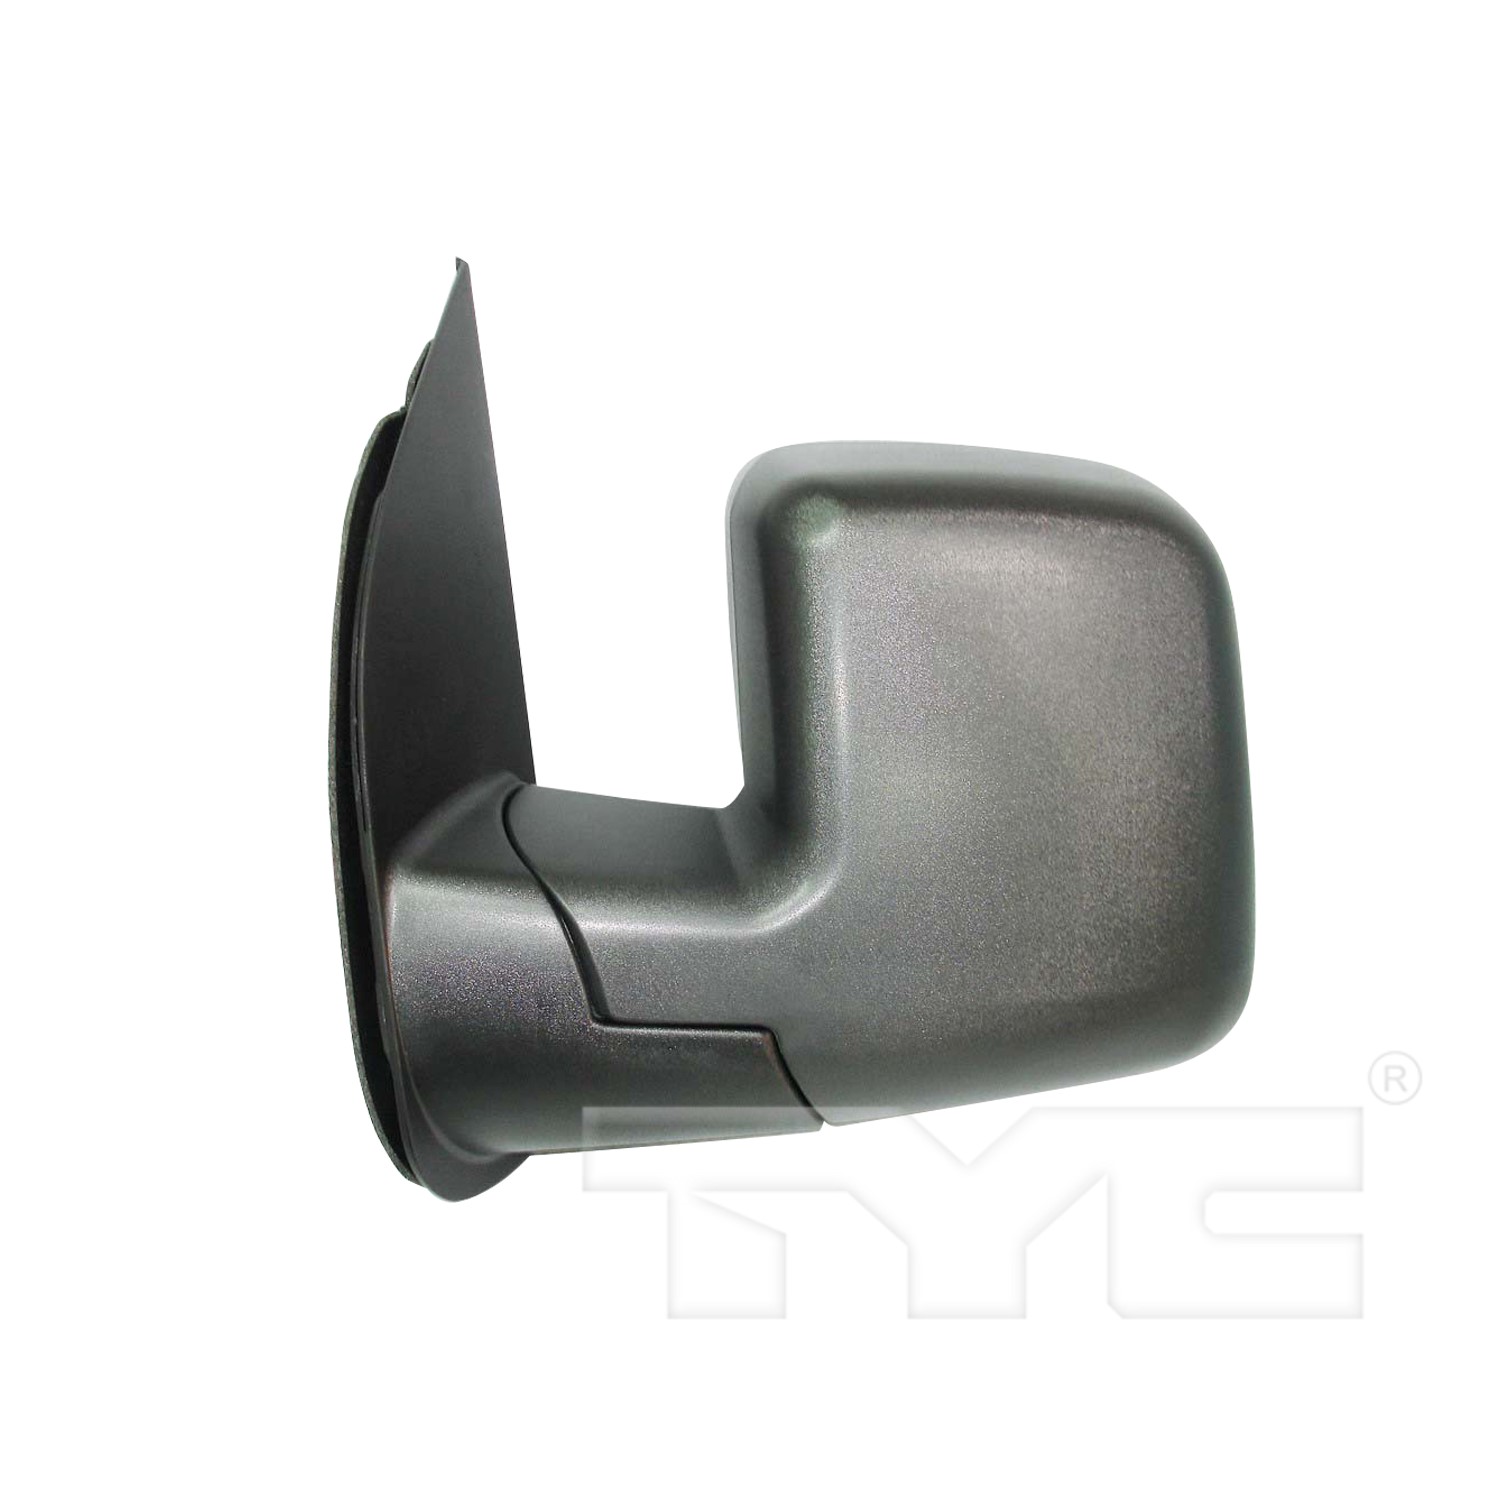 Aftermarket MIRRORS for FORD - E-250, E-250,03-07,LT Mirror outside rear view